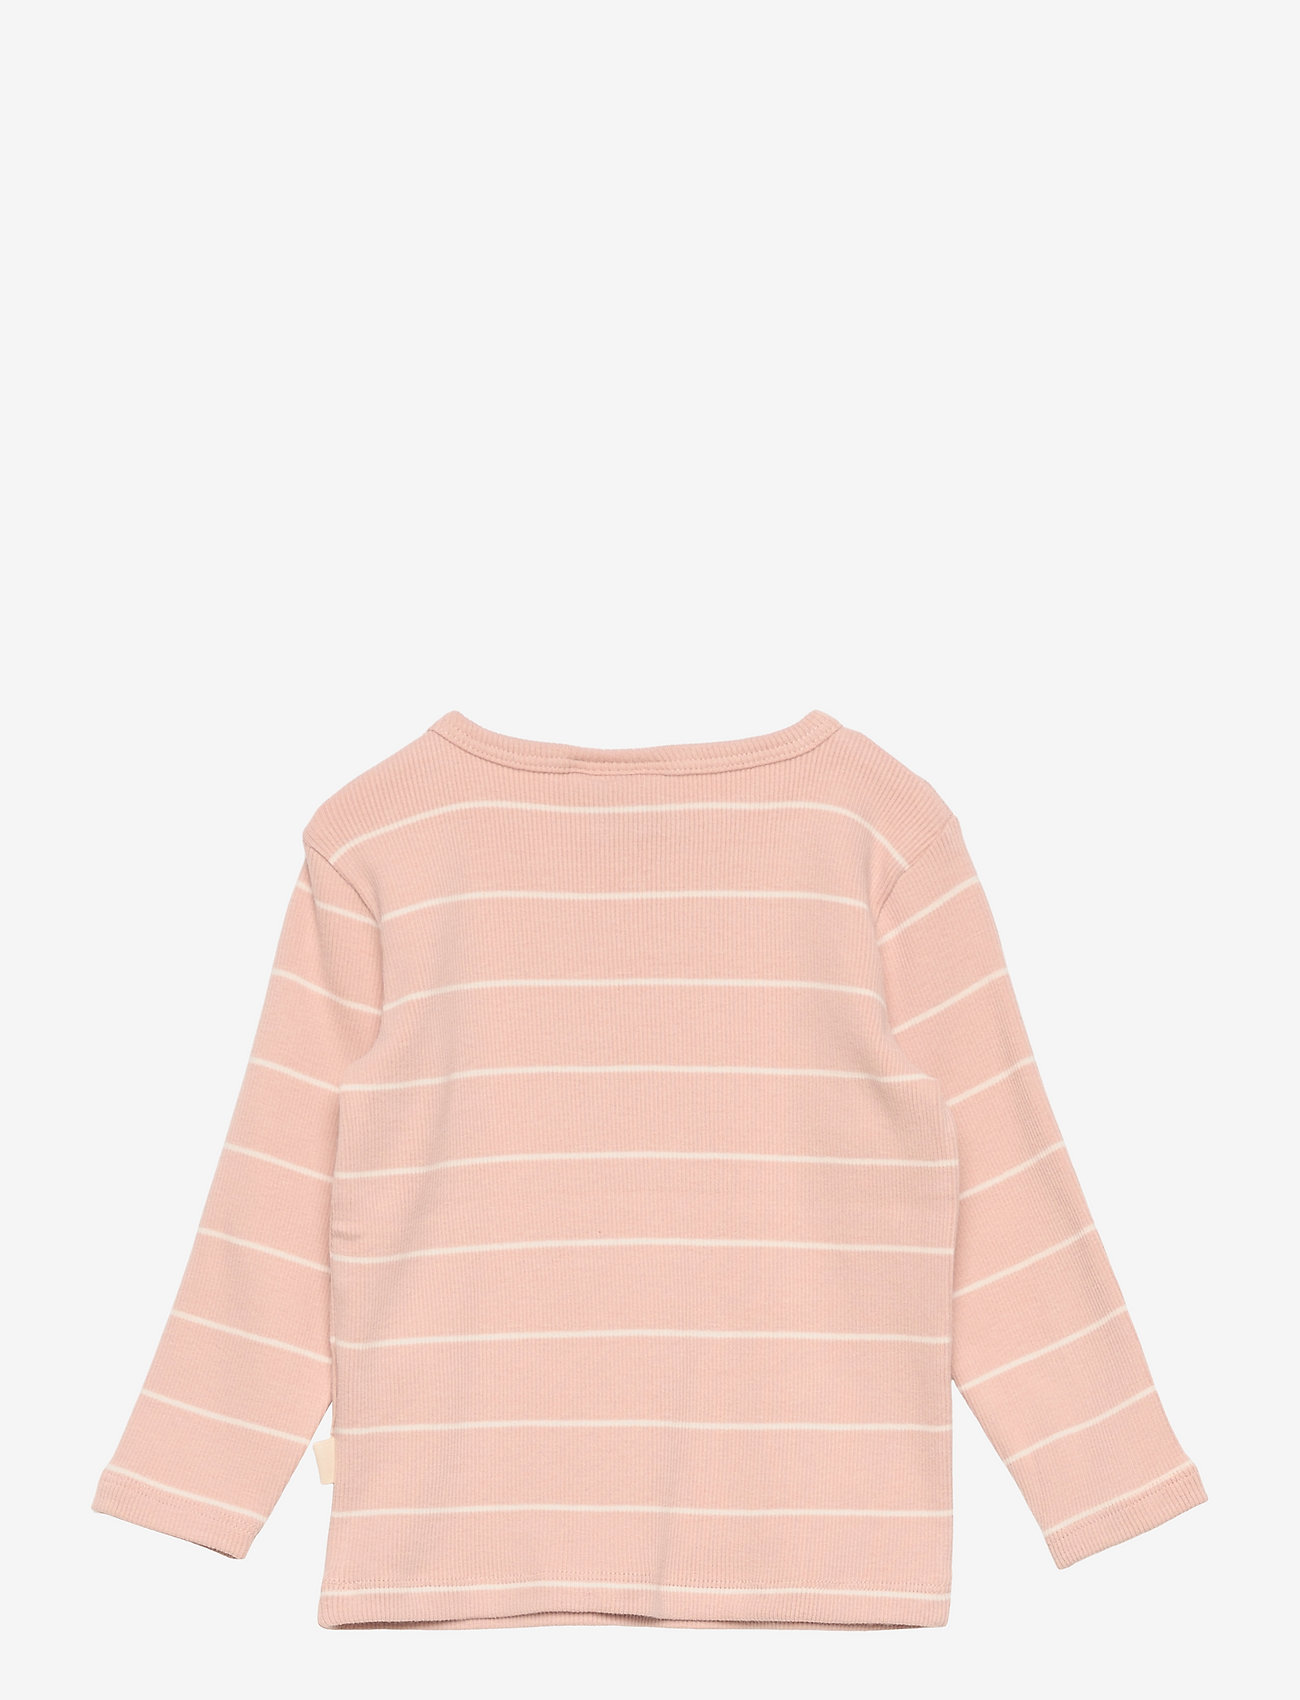 Sofie Schnoor Baby and Kids - T-shirt long-sleeve - long-sleeved t-shirts - light rose - 1